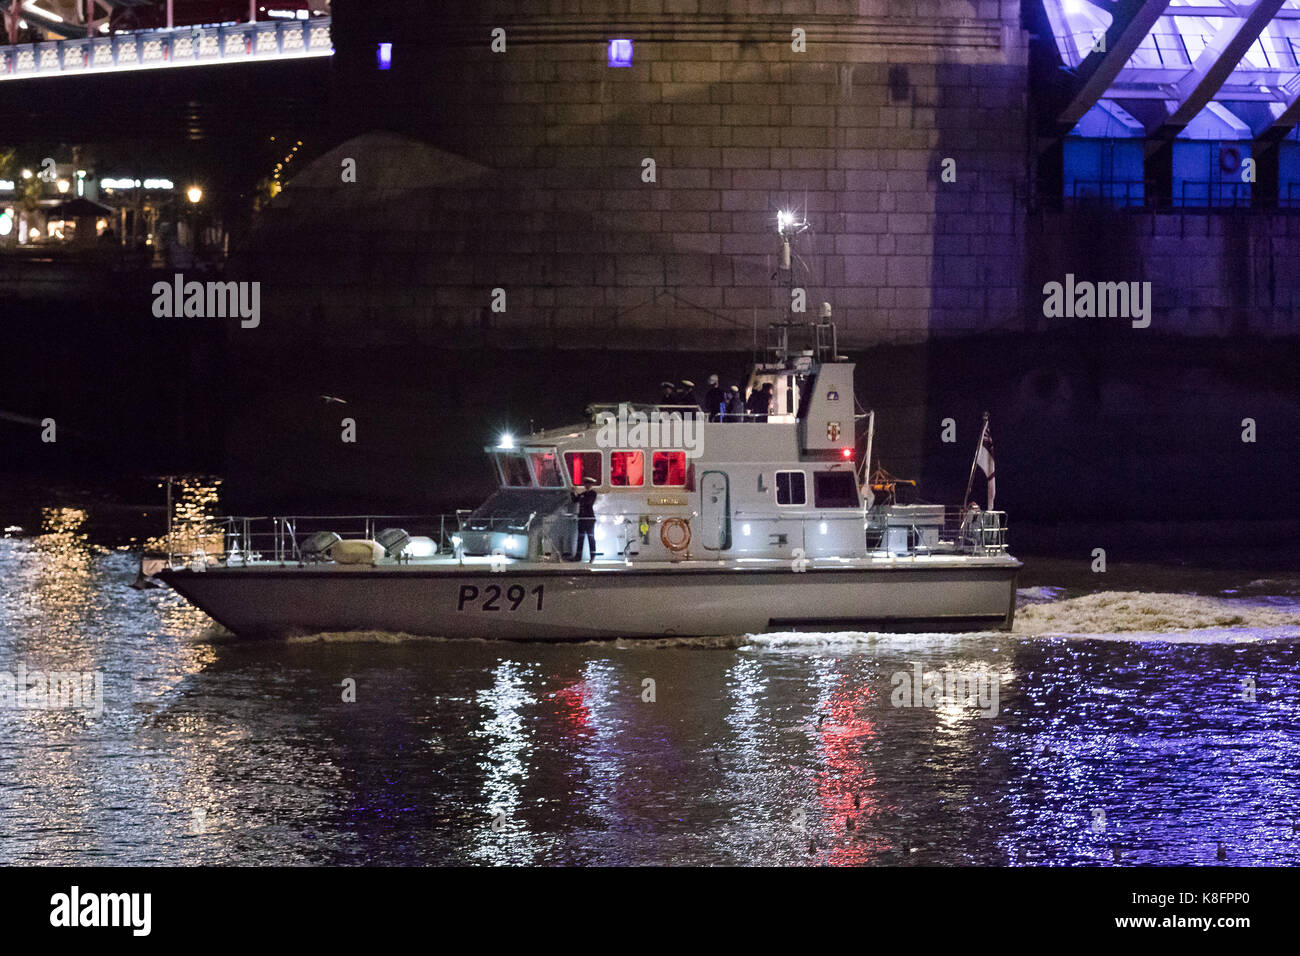 London, UK. 19th Sep, 2017. Royal Navy ship, HMS Puncher sails under a raised Tower Bridge on the River Thames to mark a change in command of the Royal Navy Reserve (RNR) following an official ceremony at HMS President, where Commander John Harriman handed over command of HMS President RNR to Commander Richmal Hardinge. Credit: Vickie Flores/Alamy Live News Stock Photo